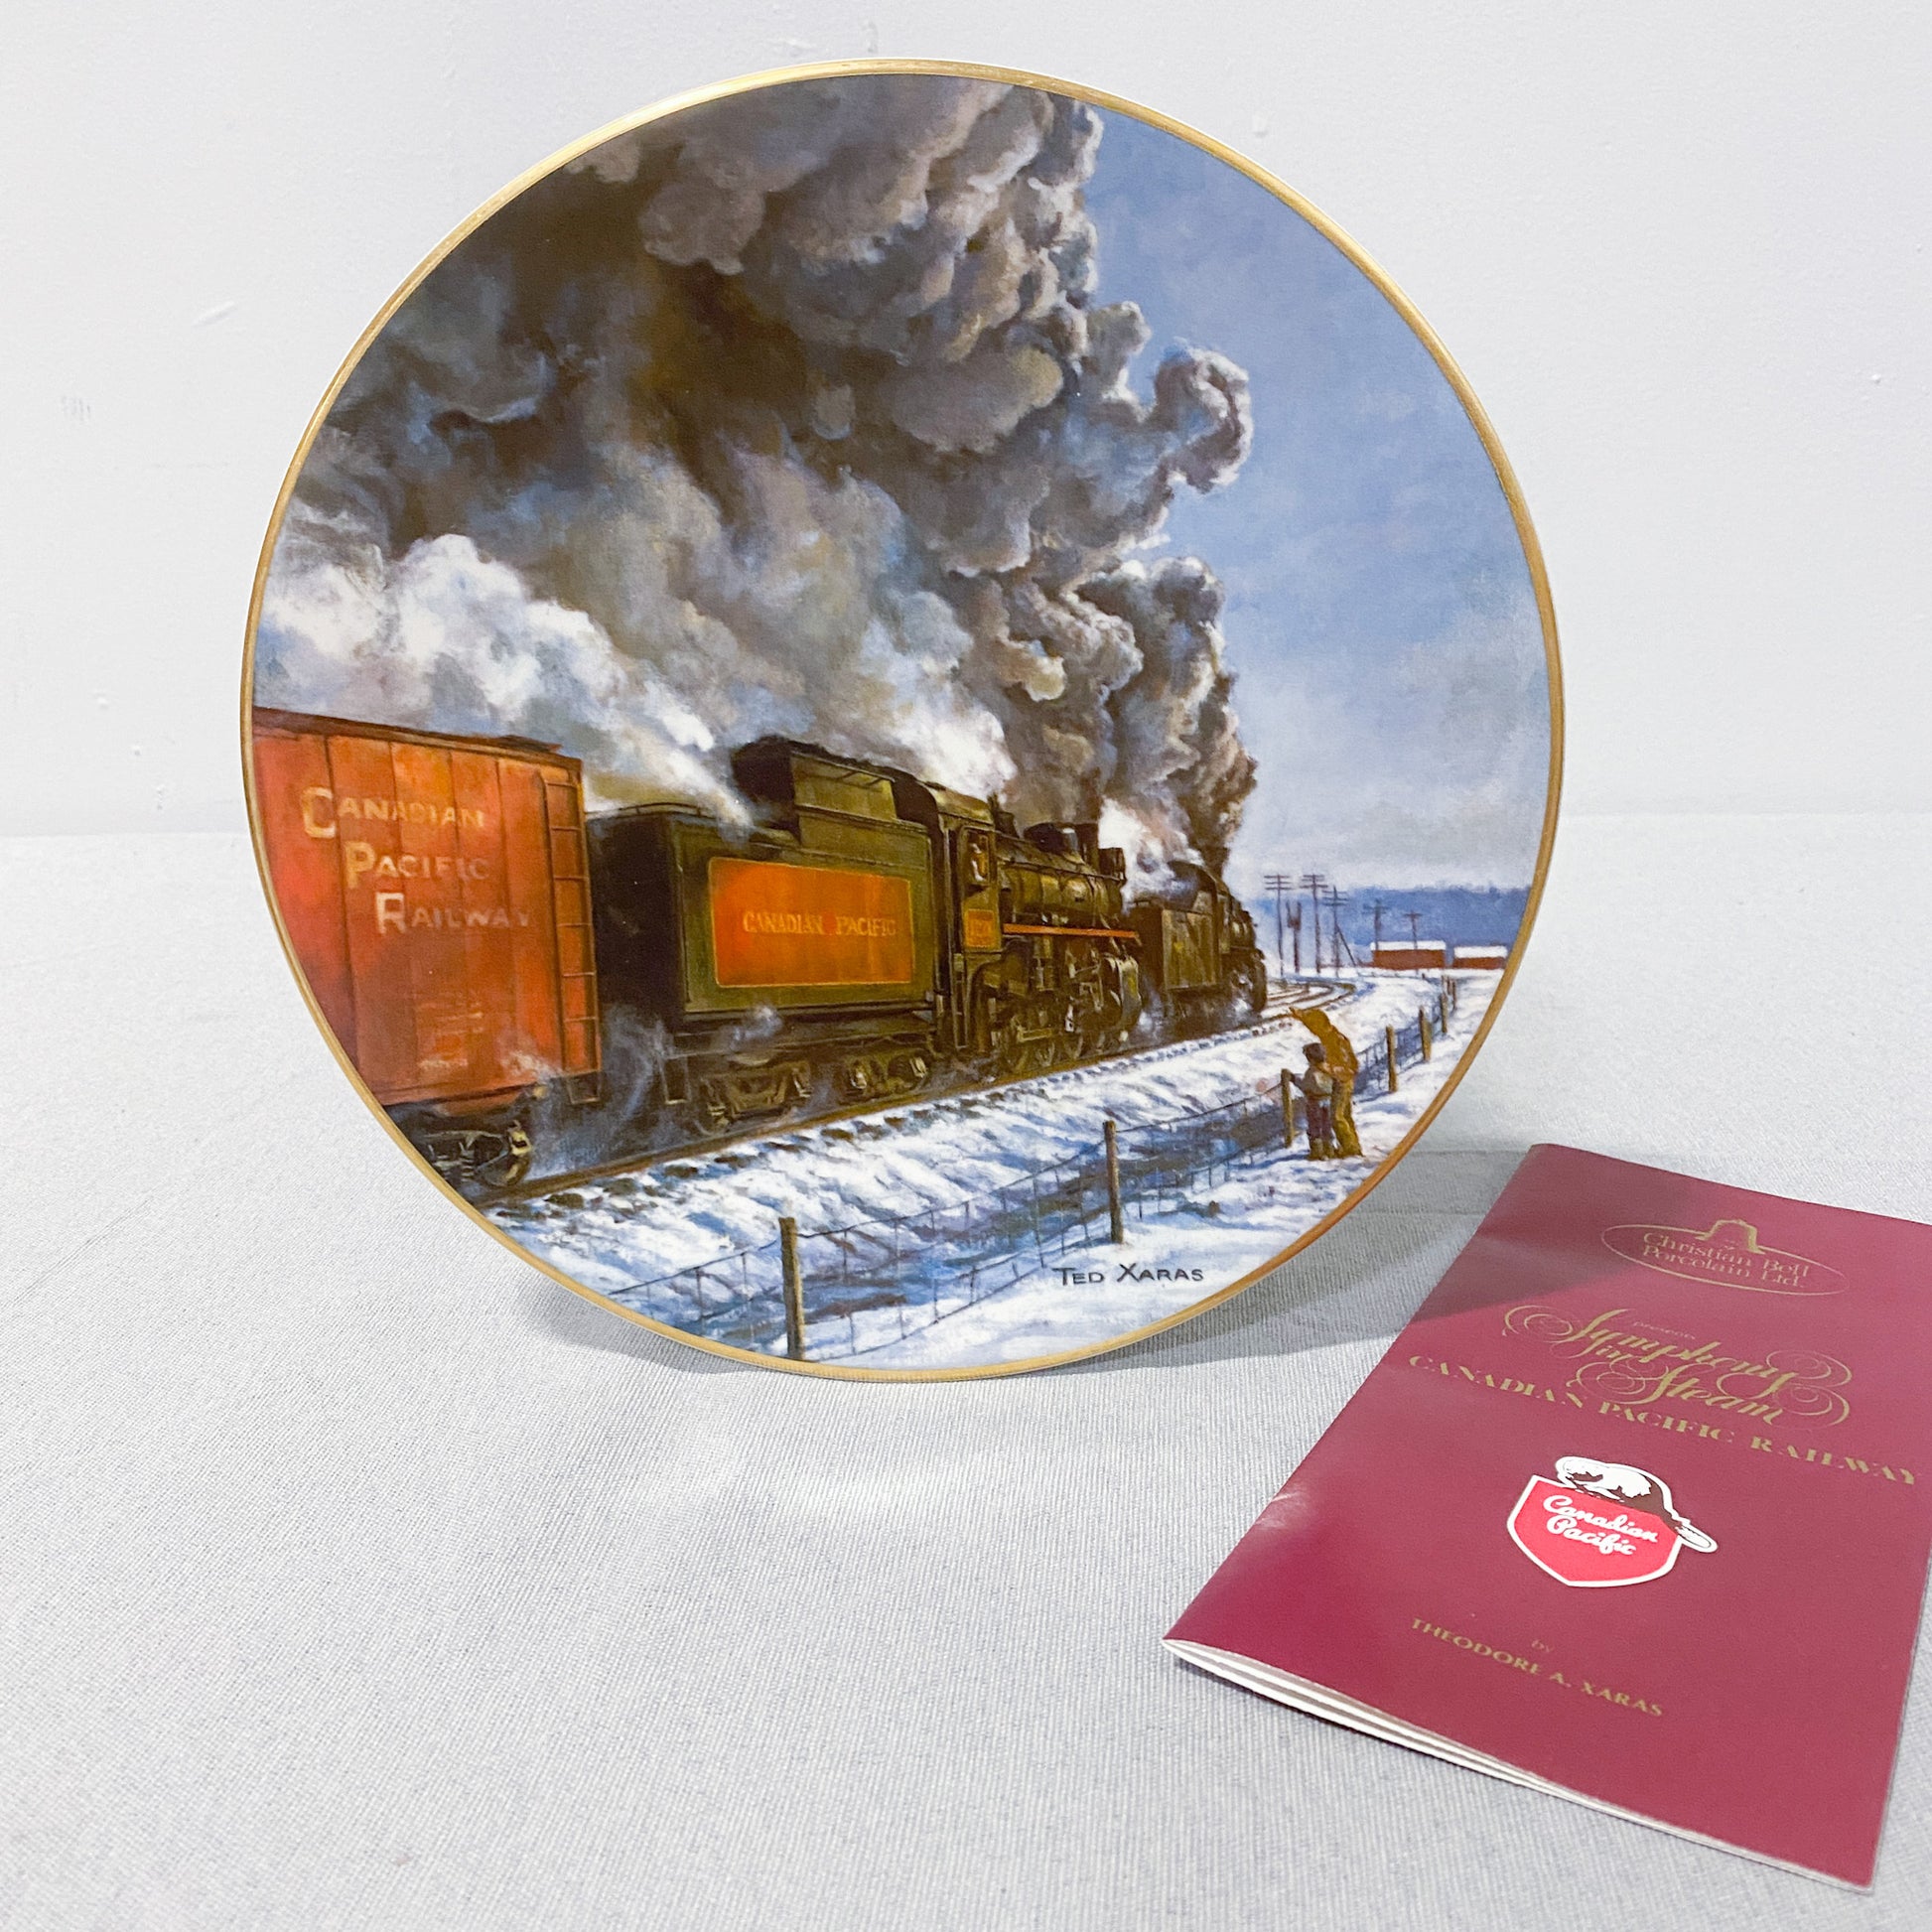 “Symphony in Steam” Collector Plate for sale in Calgary Alberta.